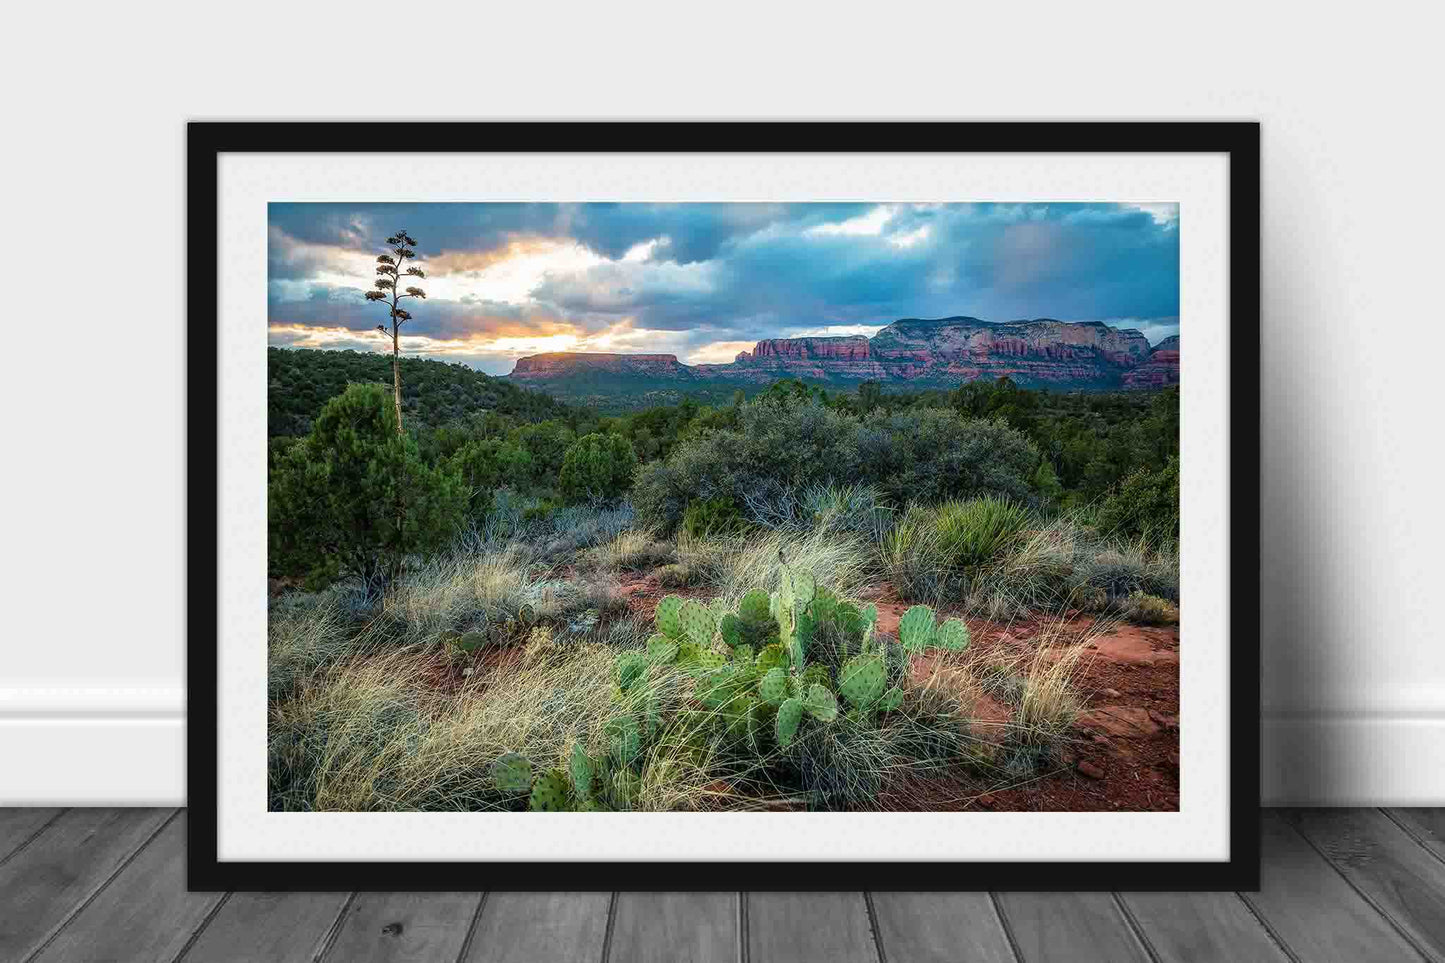 Framed and matted print of cactus and red rocks at sunset on a spring evening near Sedona, Arizona by Sean Ramsey of Southern Plains Photography.